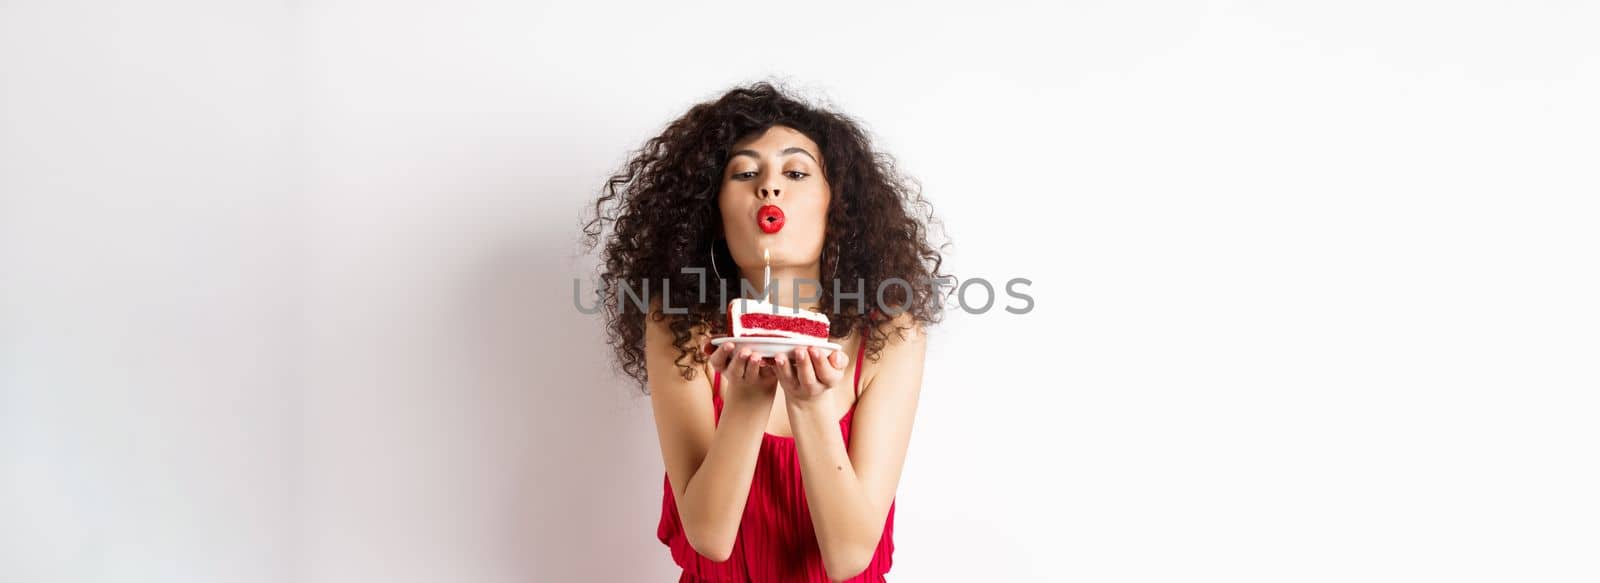 Holidays and celebration concept. Romantic woman in red dress celebrating birthday, blowing out candle on b-day cake and making wish, standing over white background.